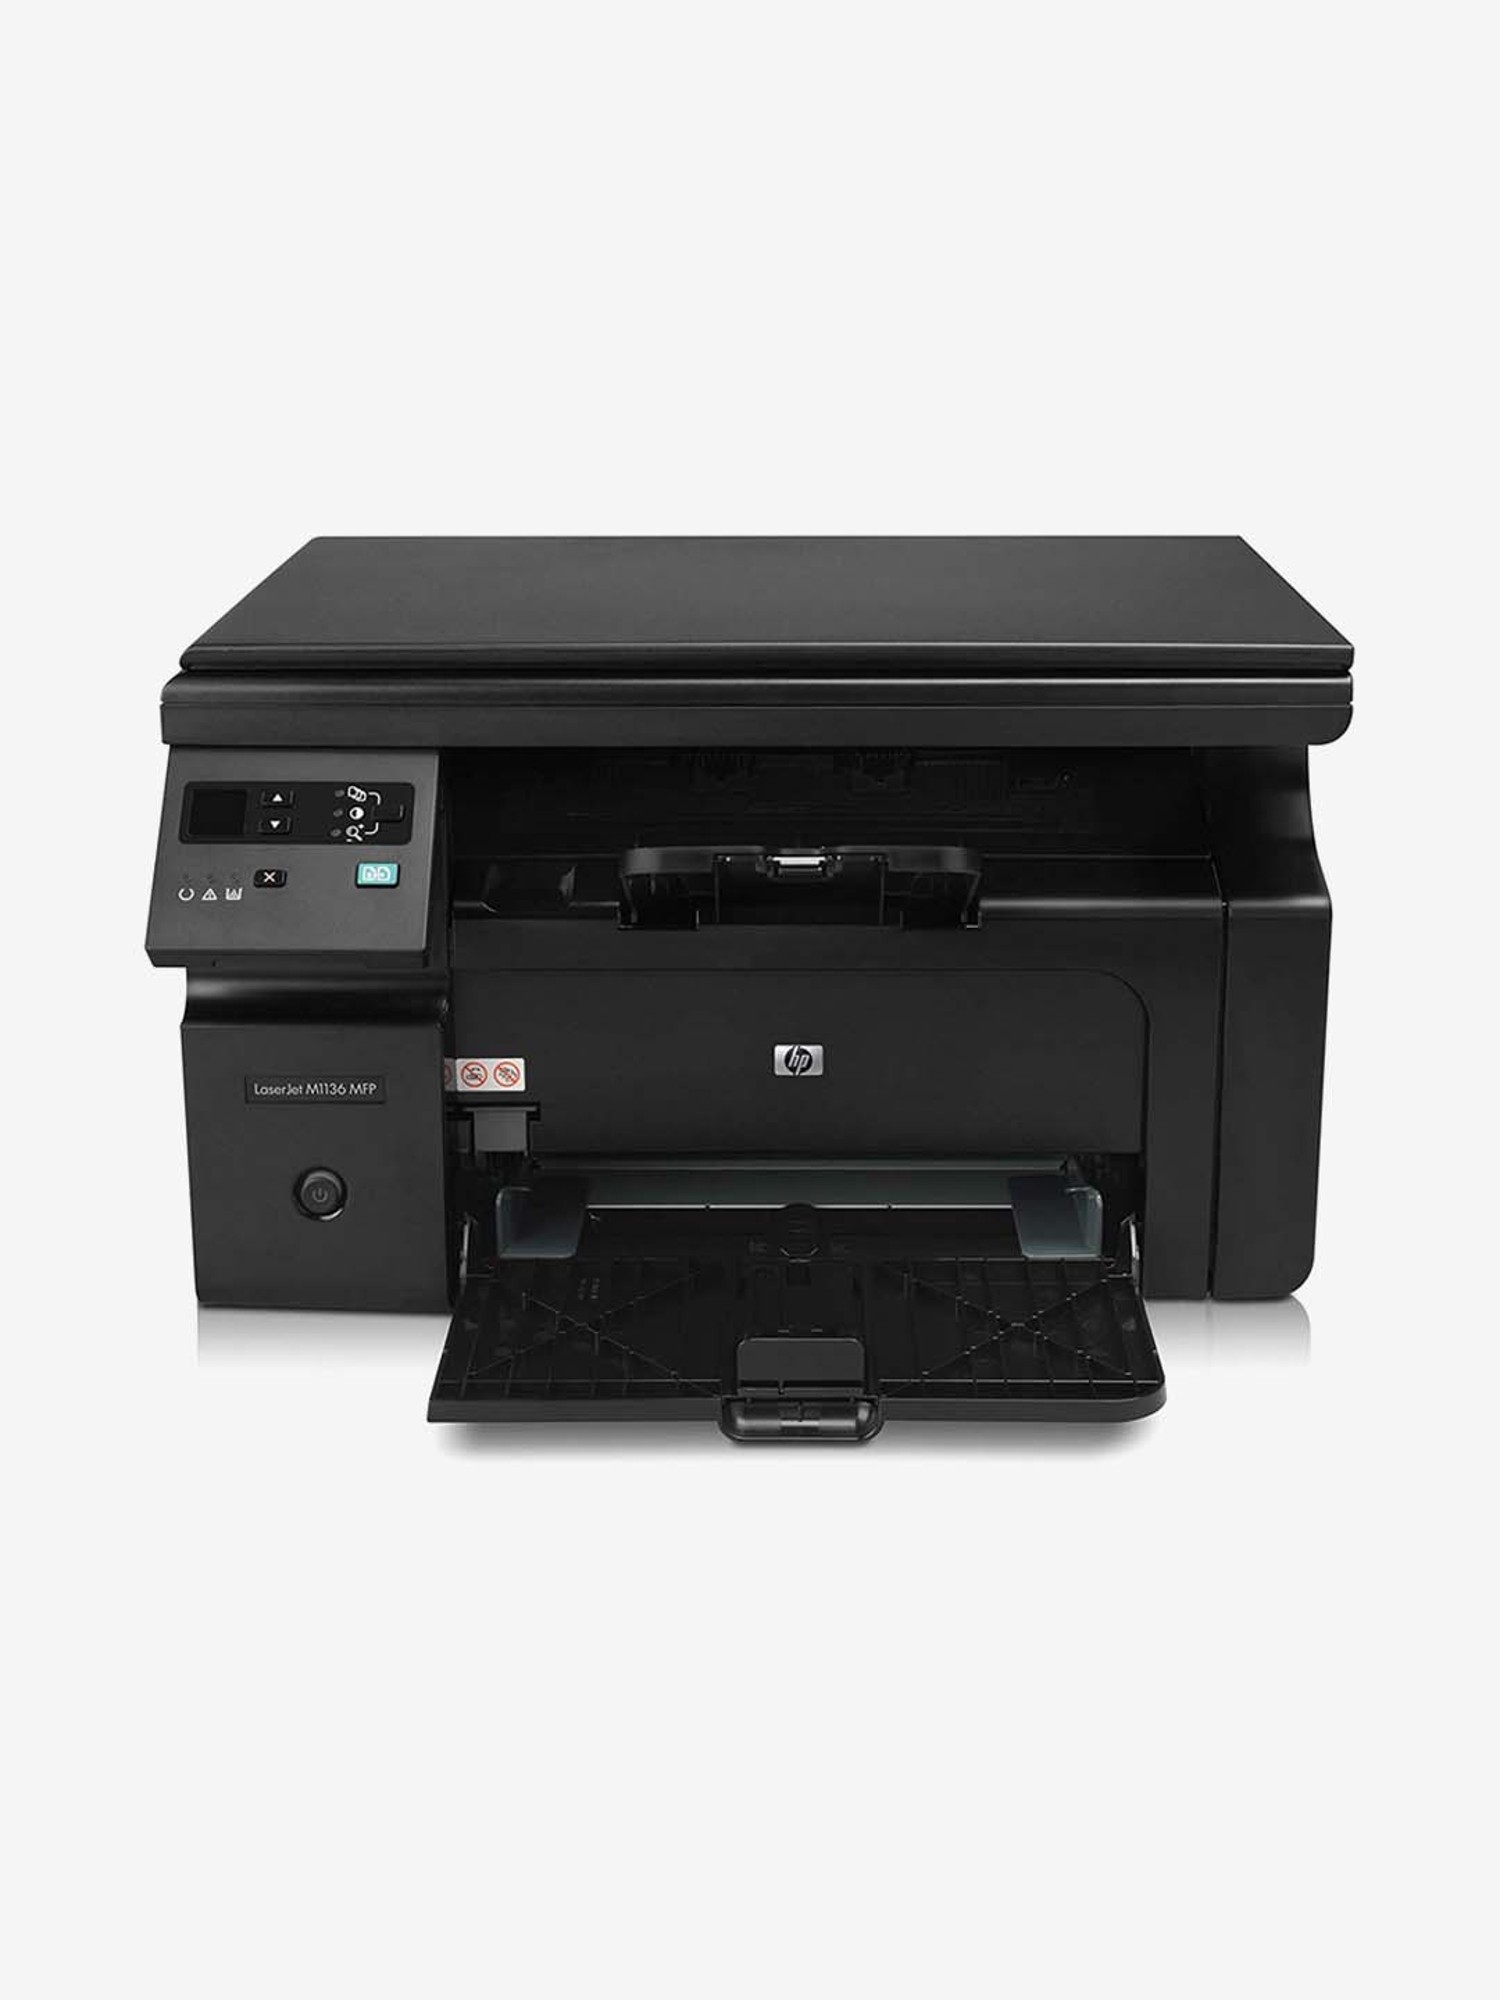 Laserjet M1136 Mfp Driver Download : Download and install ...